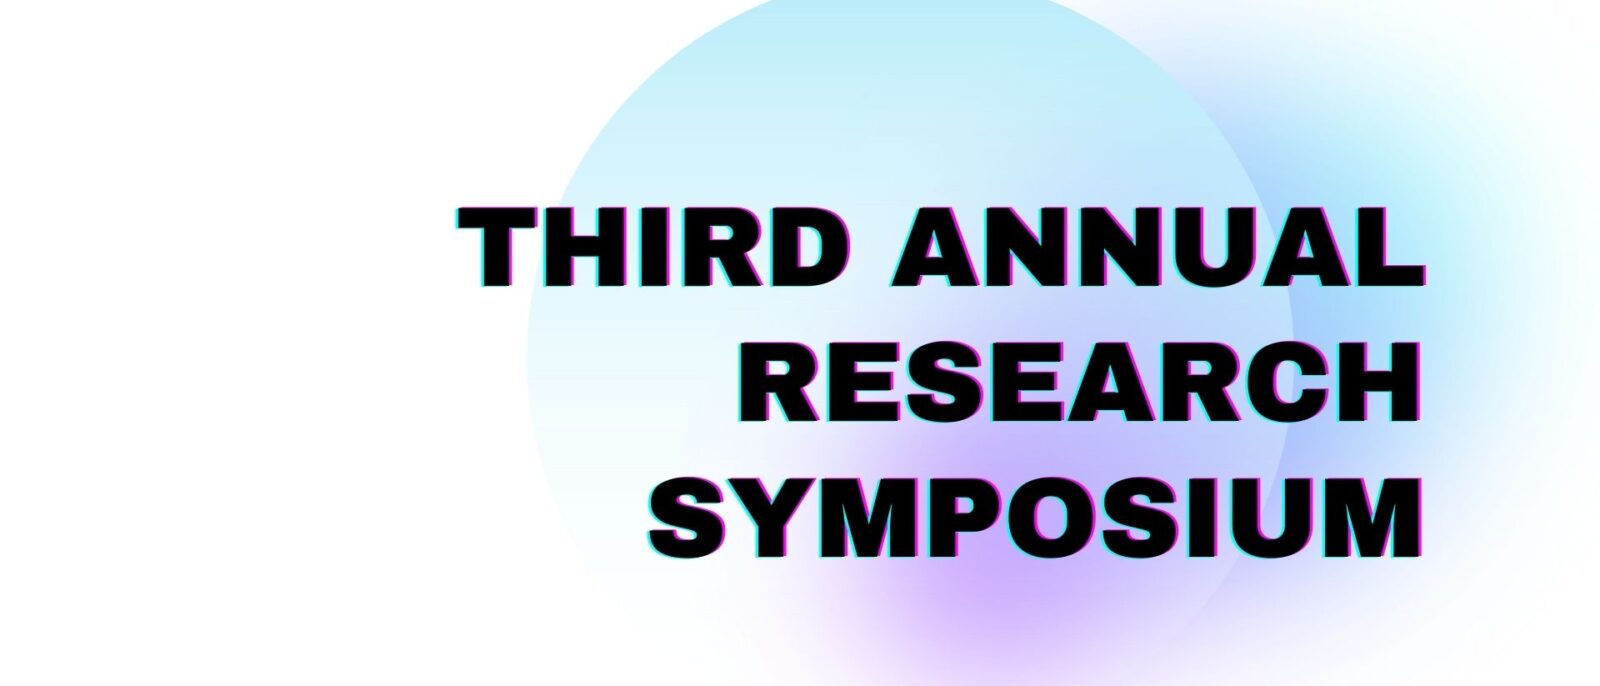 HU to hold Third Annual Research Symposium